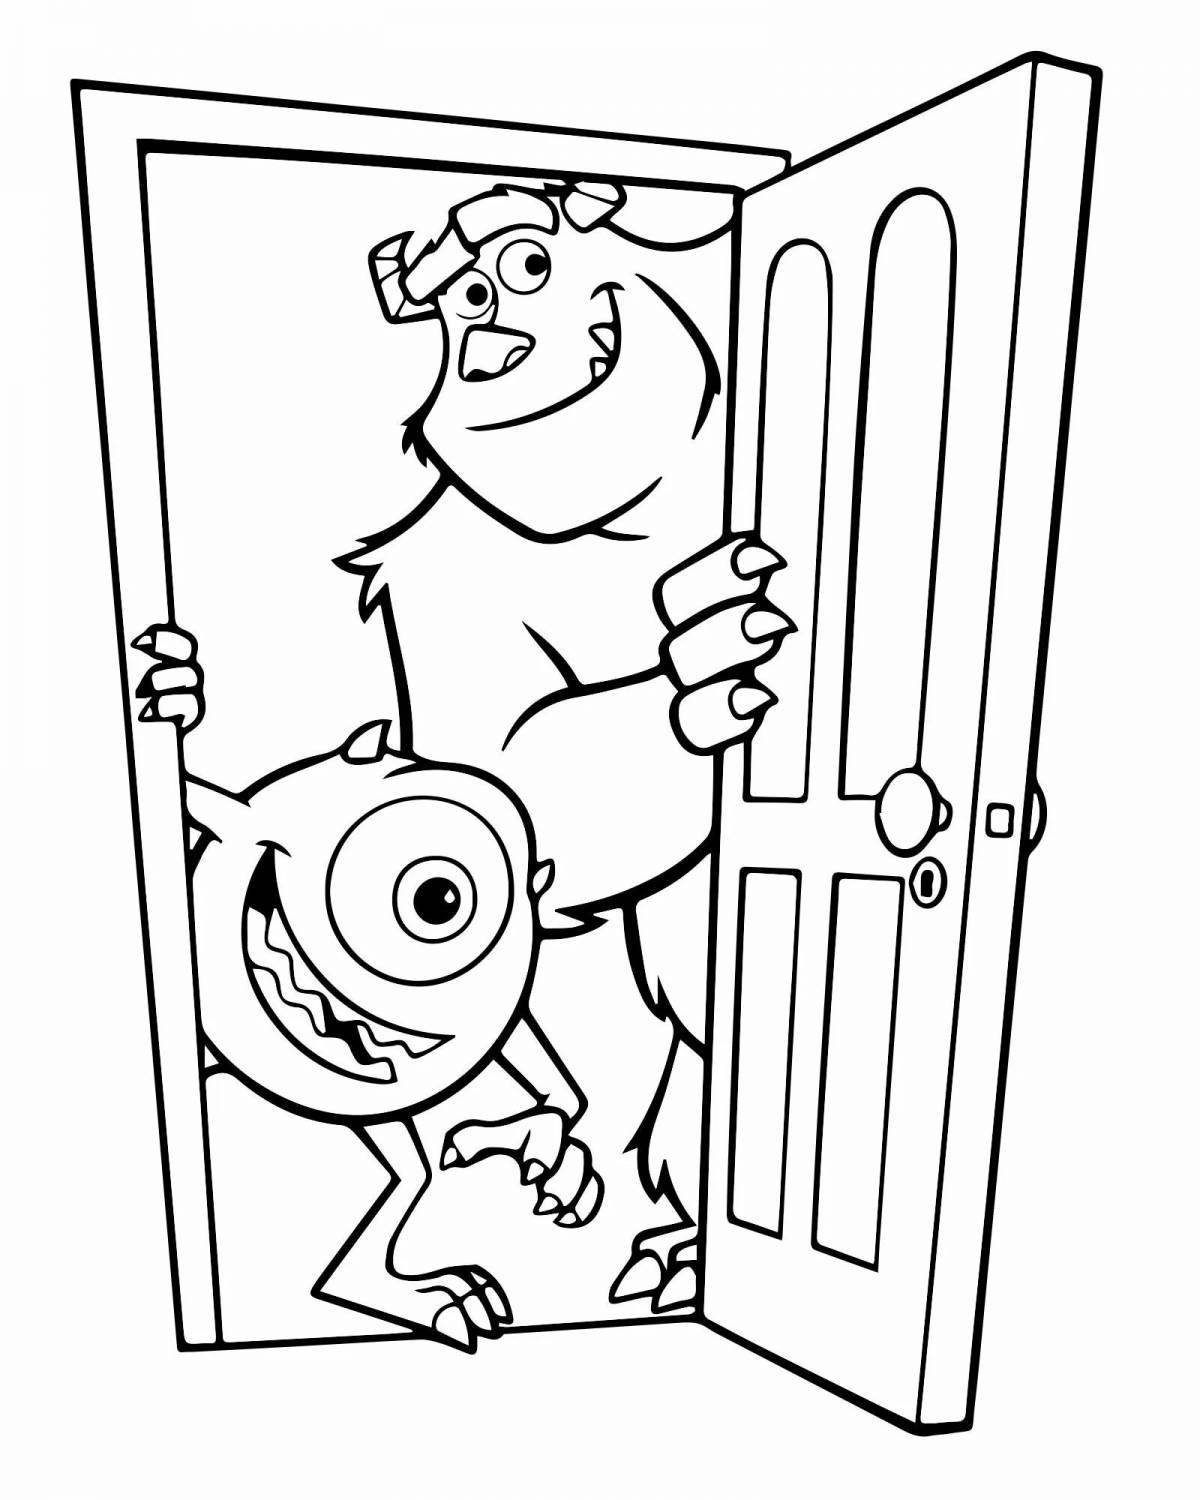 Colorful door coloring page for kids